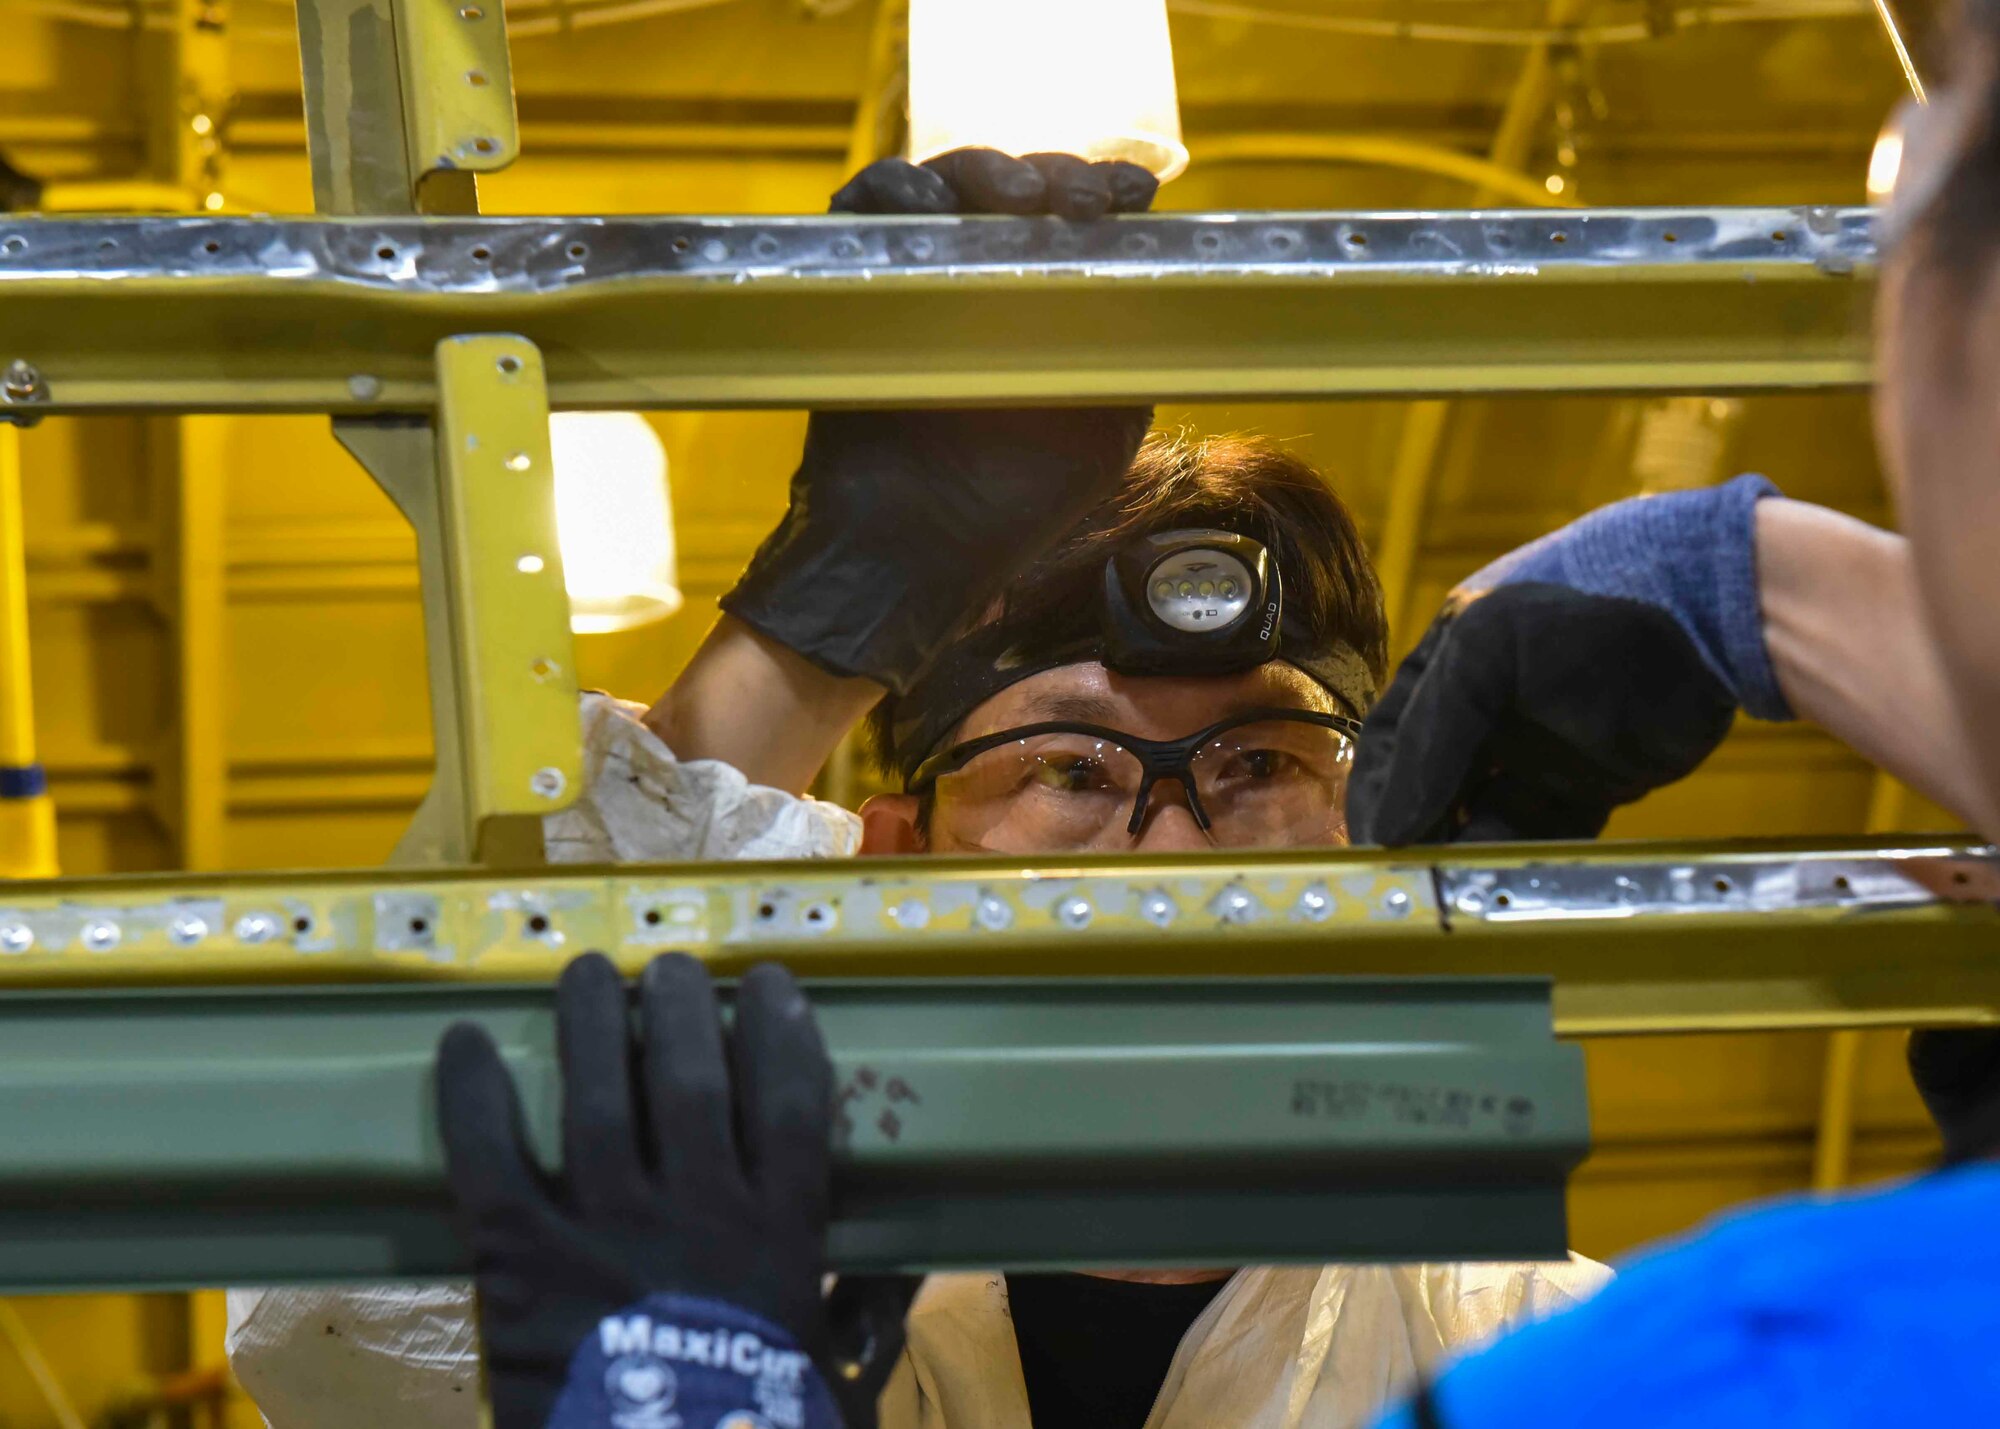 A 564th Aircraft Maintenance Squadron worker assists with programmed depot maintenance on a KC-135 Stratotanker at the Oklahoma City Air Logistics Complex on Tinker Air Force Base, Oklahoma, Nov. 23, 2019. Once PDM is complete, Airmen from the aircraft’s home station tour the OC-ALC to discuss with the workers common defects they’re experiencing with the aircraft. (U.S. Air Force photo by Airman Kiaundra Miller)